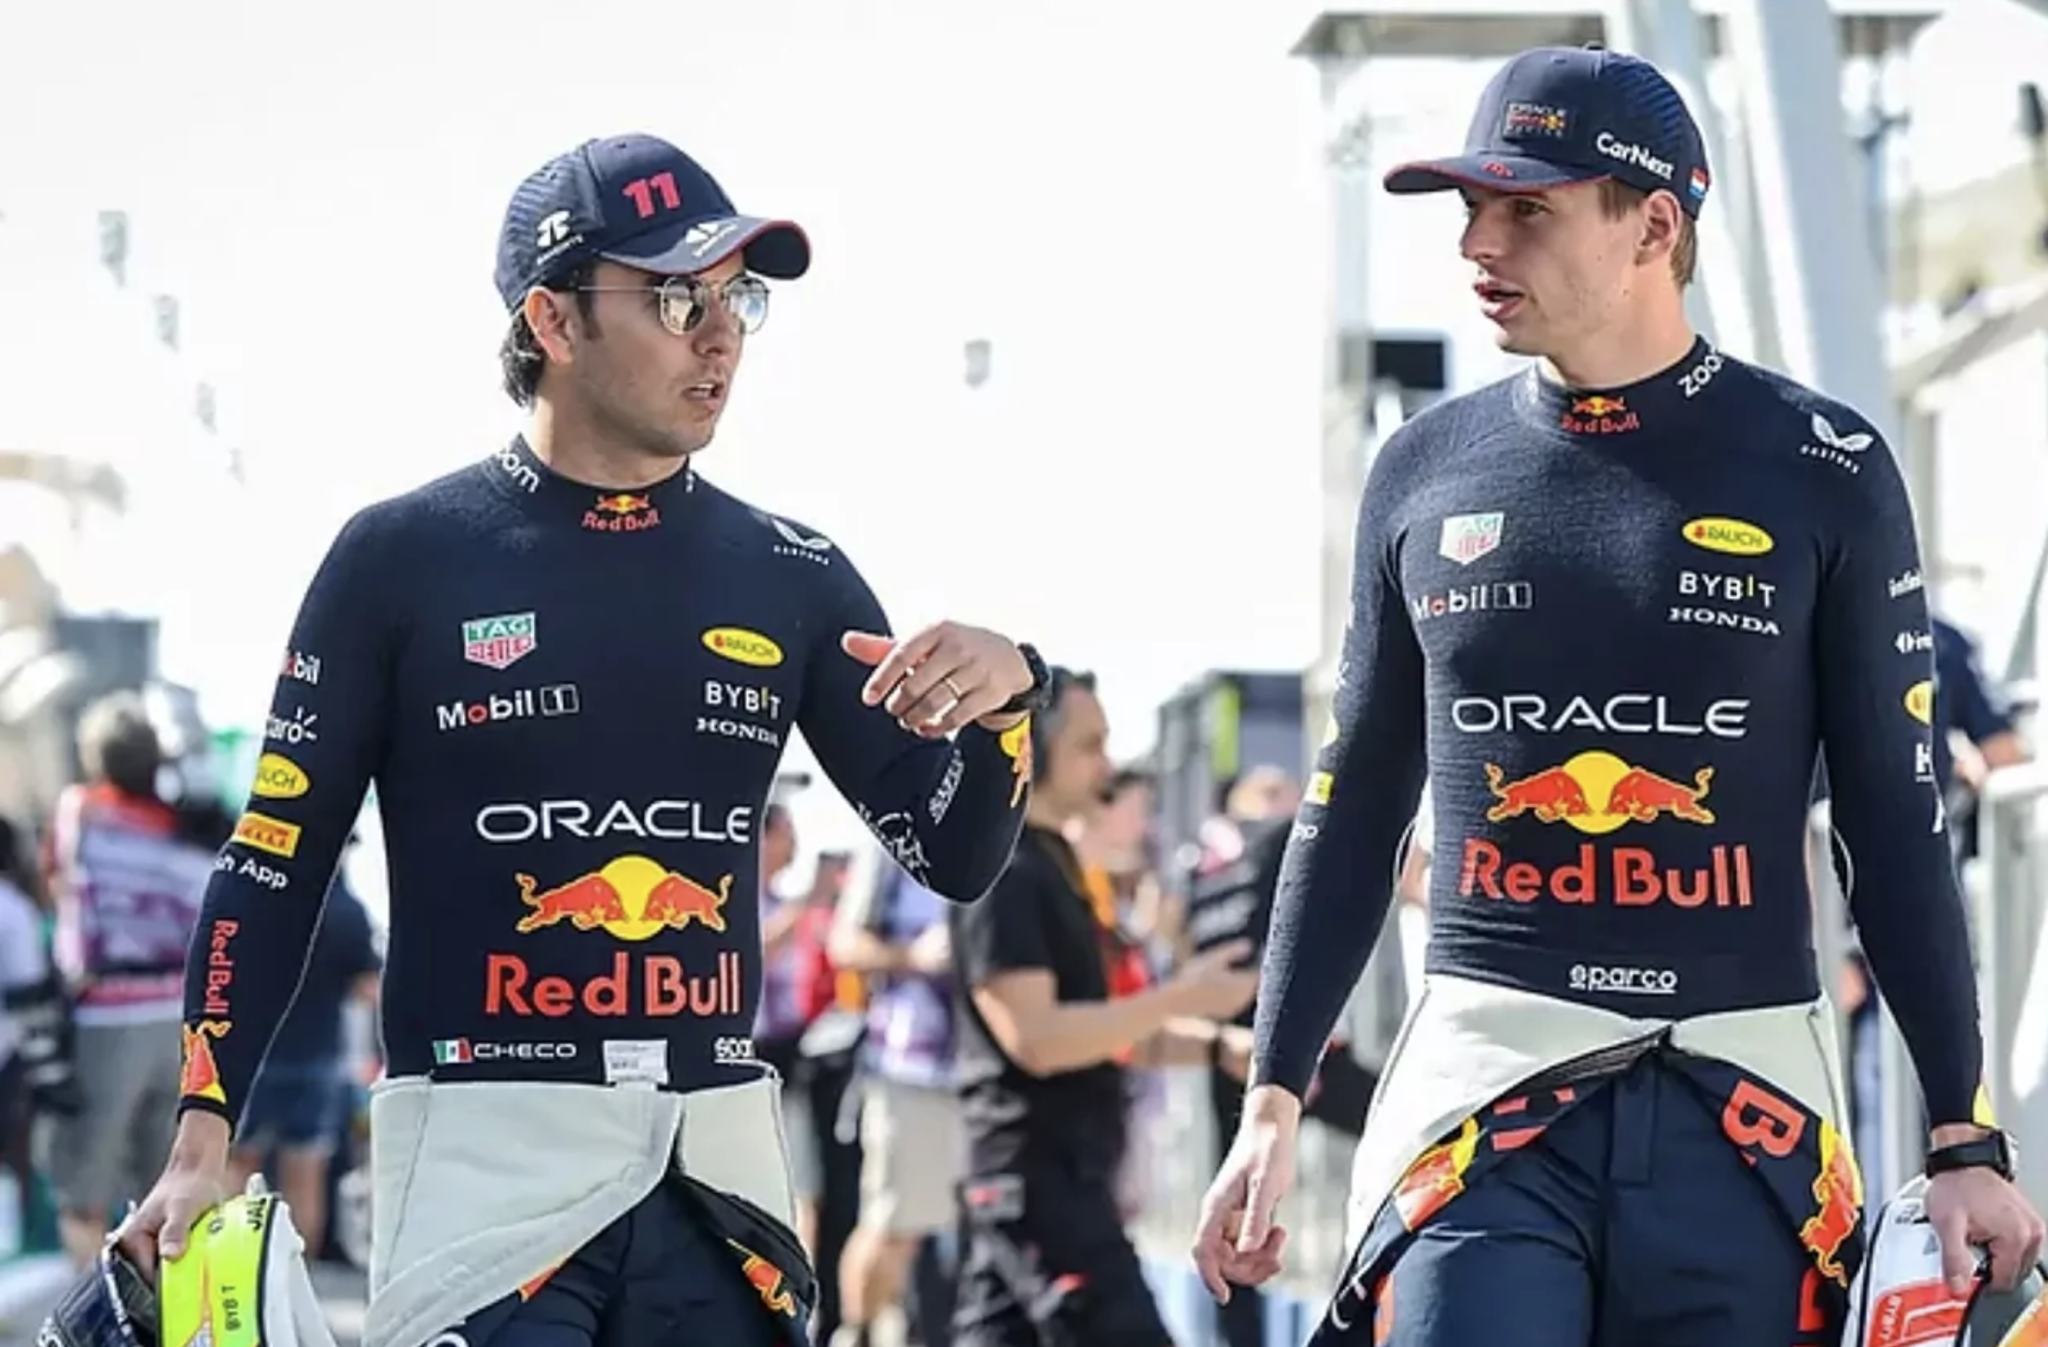 Five reasons why Checo Perez should 'rebel' against Verstappen